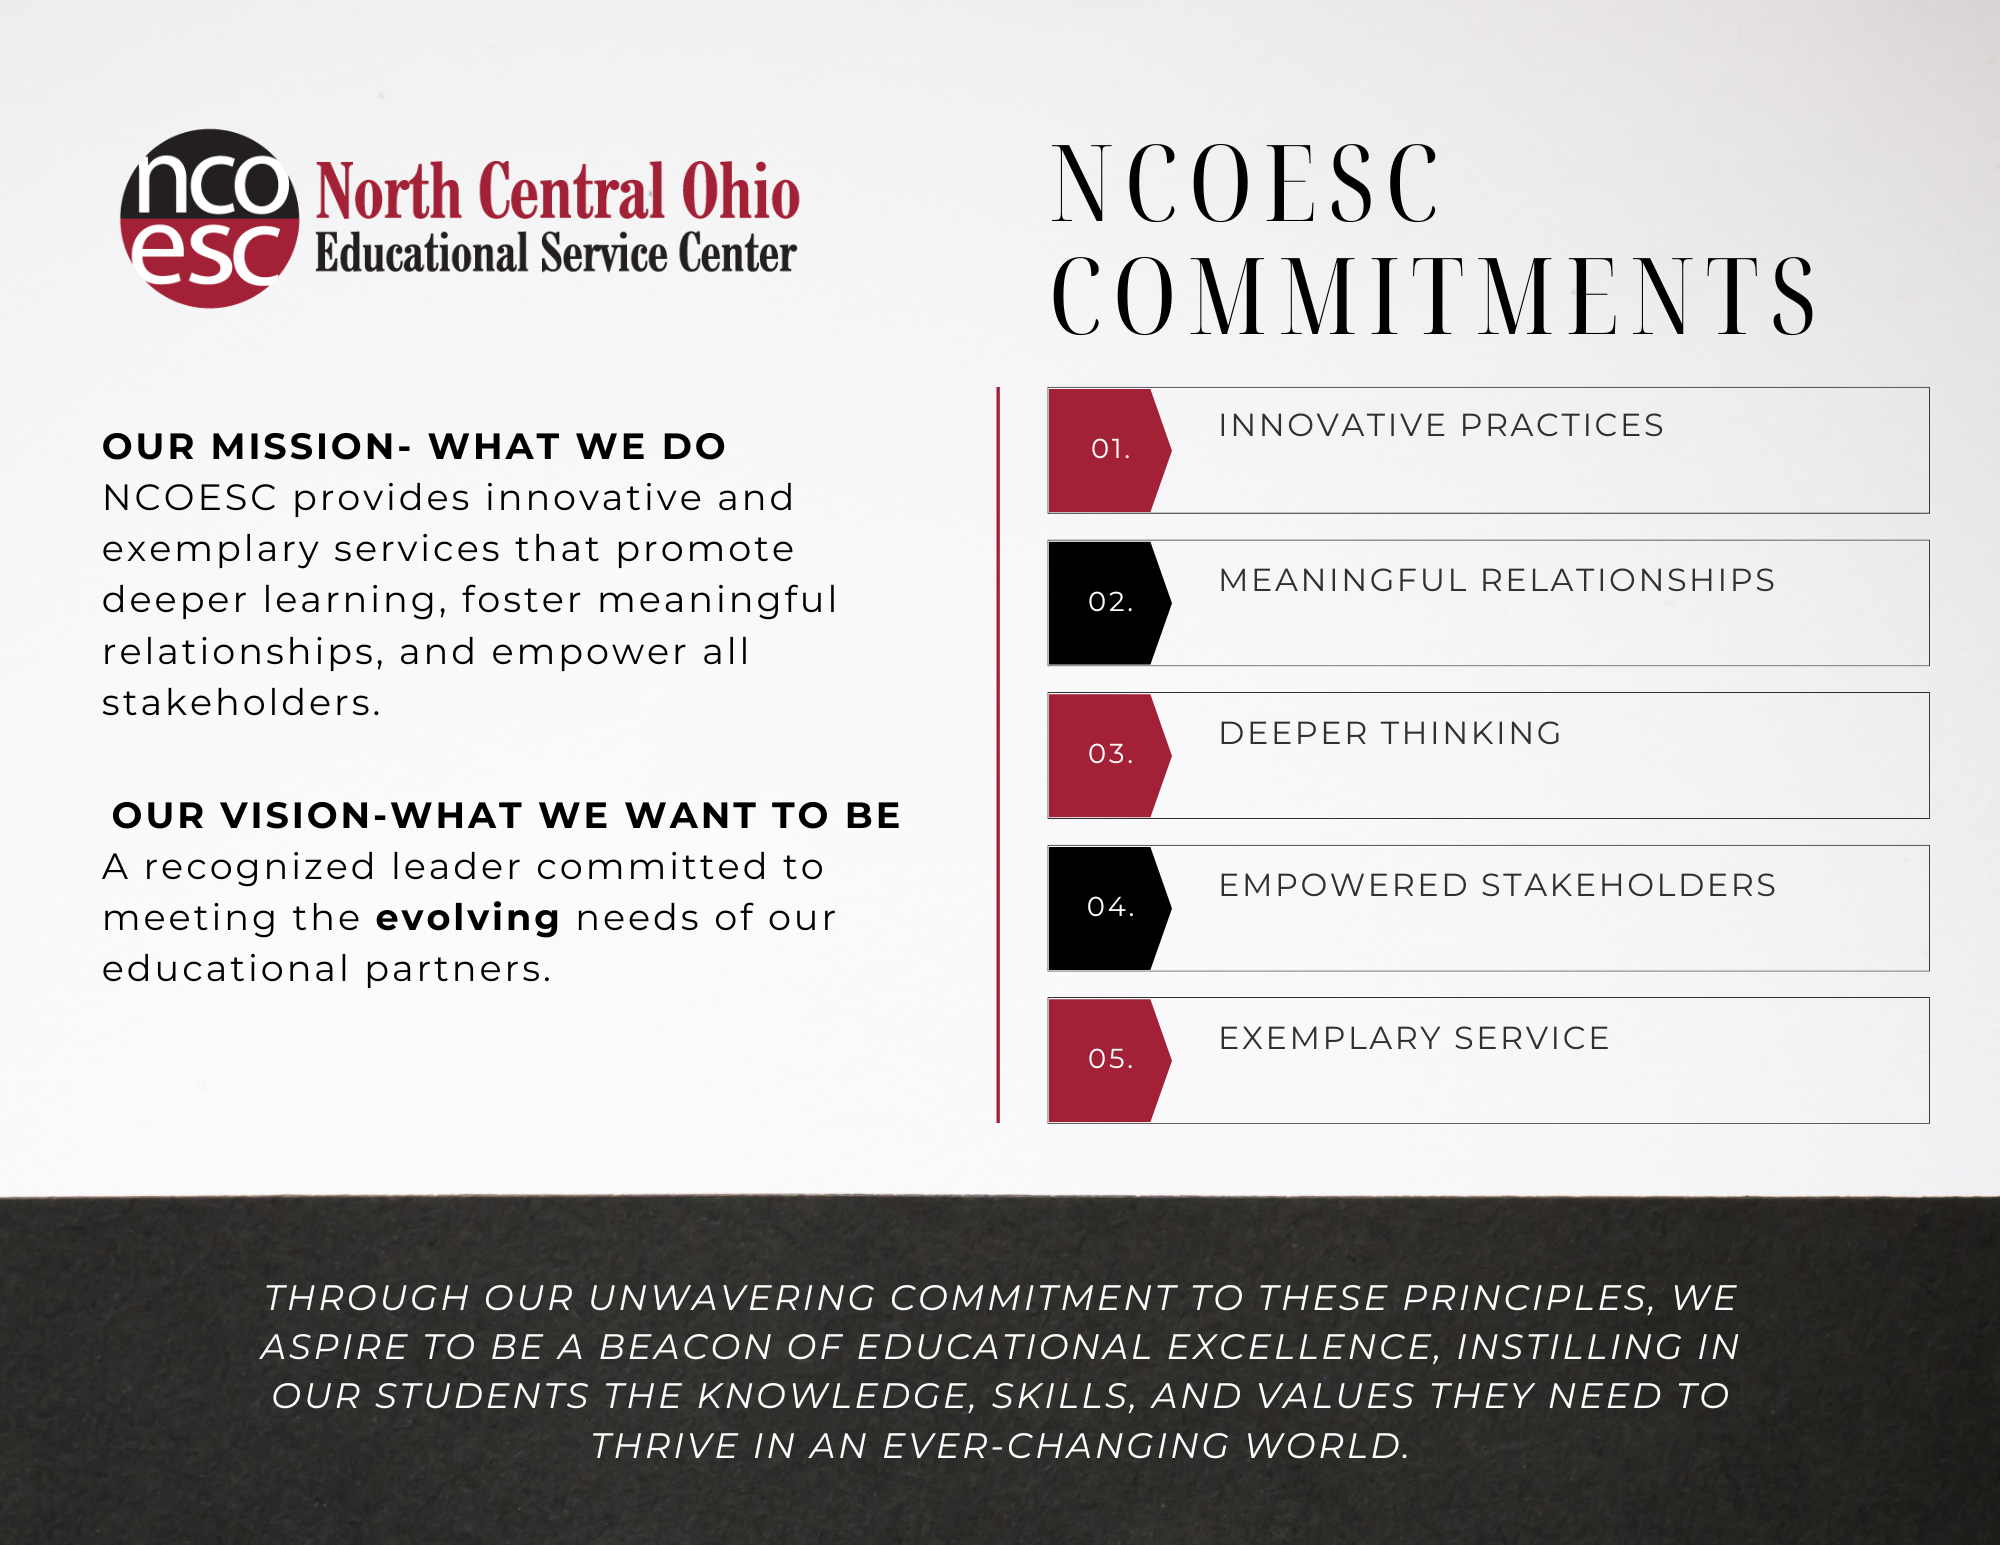 NCOESC Mission: NCOESC provides innovative and exemplary services that promote deeper learning, foster meaningful relationships, and empower all stakeholders. NCOESC Vision: A recognized leader committed to meeting the evolving needs of our educational partners.  NCOESC Commitments 1) Innovative Practices 2) Meaningful Relationships 3) Deeper Thinking 4) Empowered Stakeholders 5) Exemplary Service.  Through our unwavering commitment to these principles, we aspire to be a beacon of educational excellence, instilling in our students the knowledge, skills, and values they need to thrive in an ever-changing world.